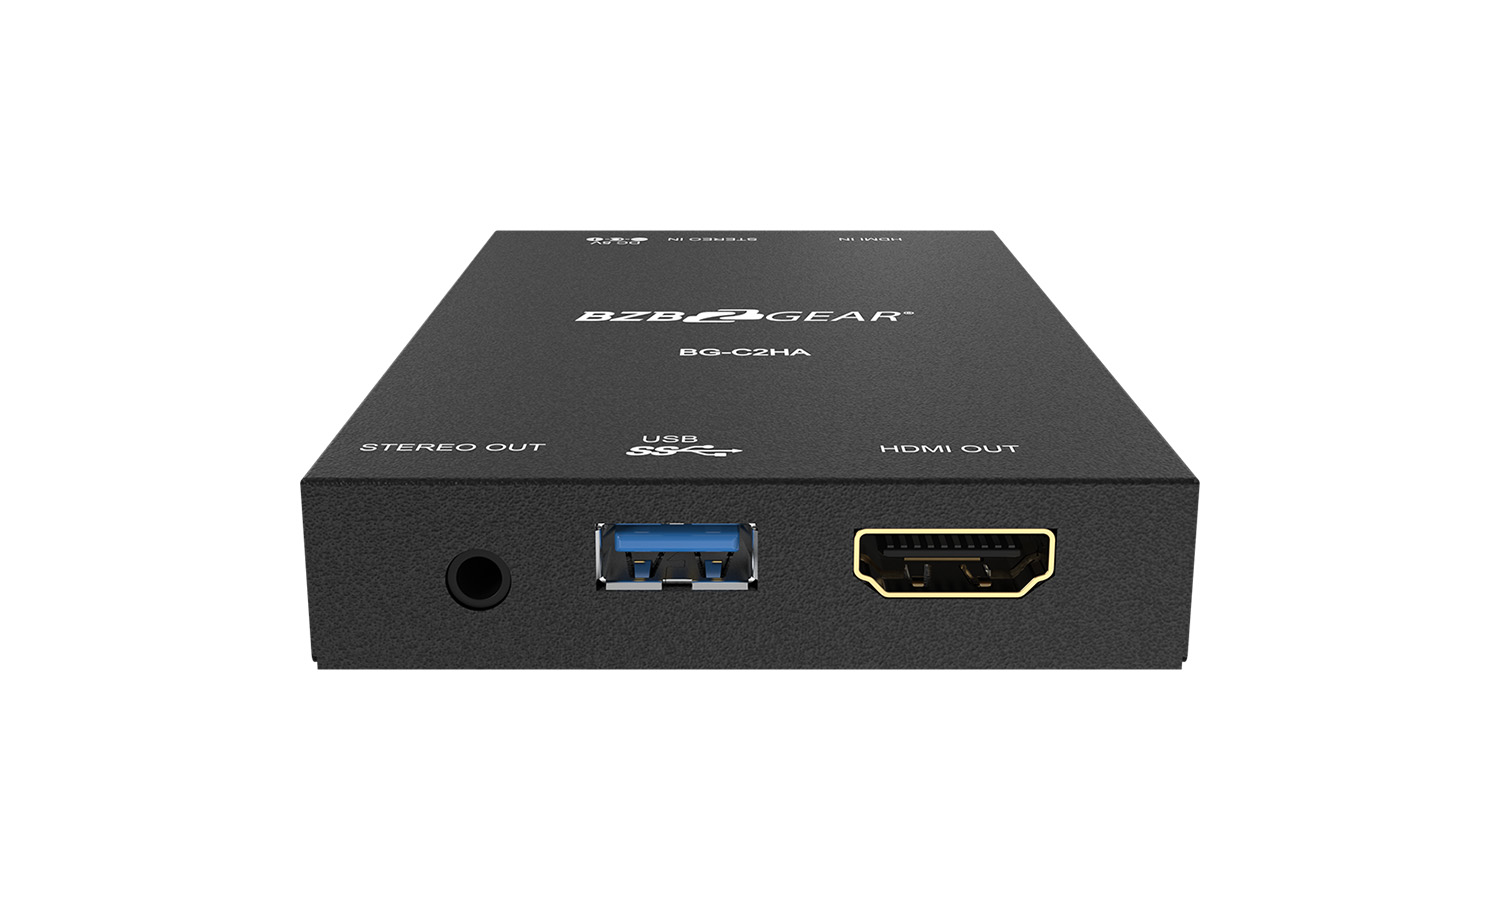 BG-C2HA USB 3.0 1080P FHD Video Capture Card with HDMI Loop-out and Audio by BZBGEAR